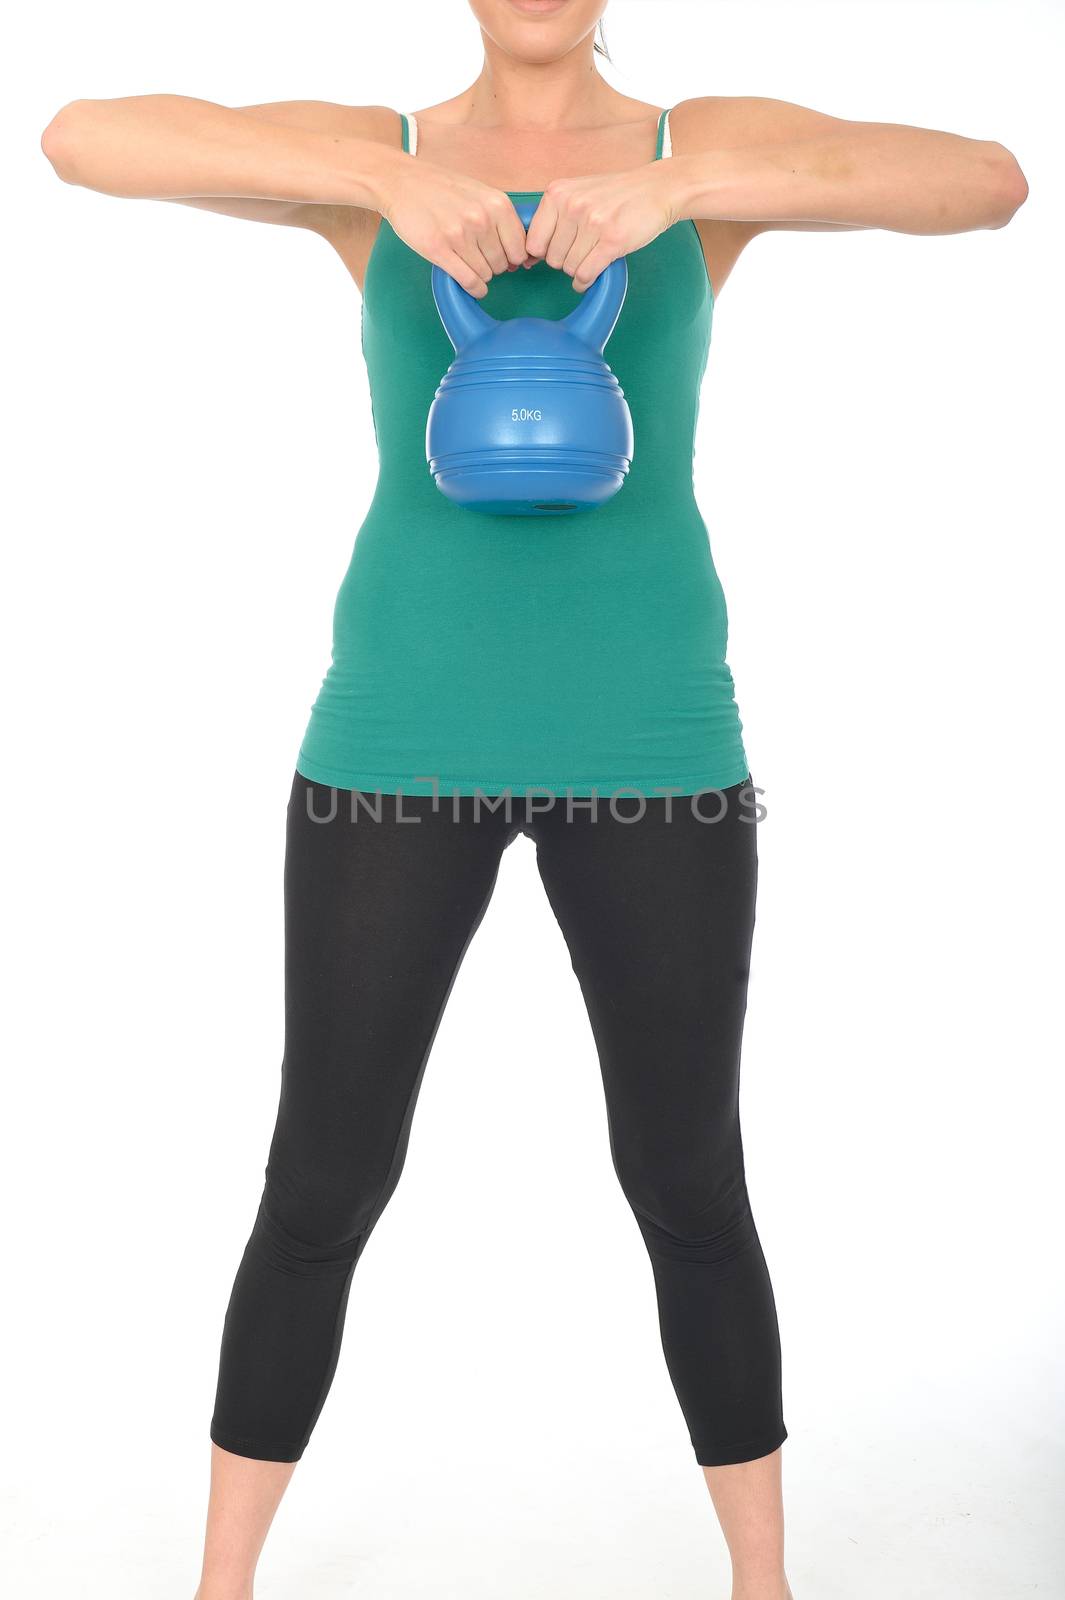 Attractive Healthy Young Woman Lifting a 5kg Kettle Bell Weight by Whiteboxmedia